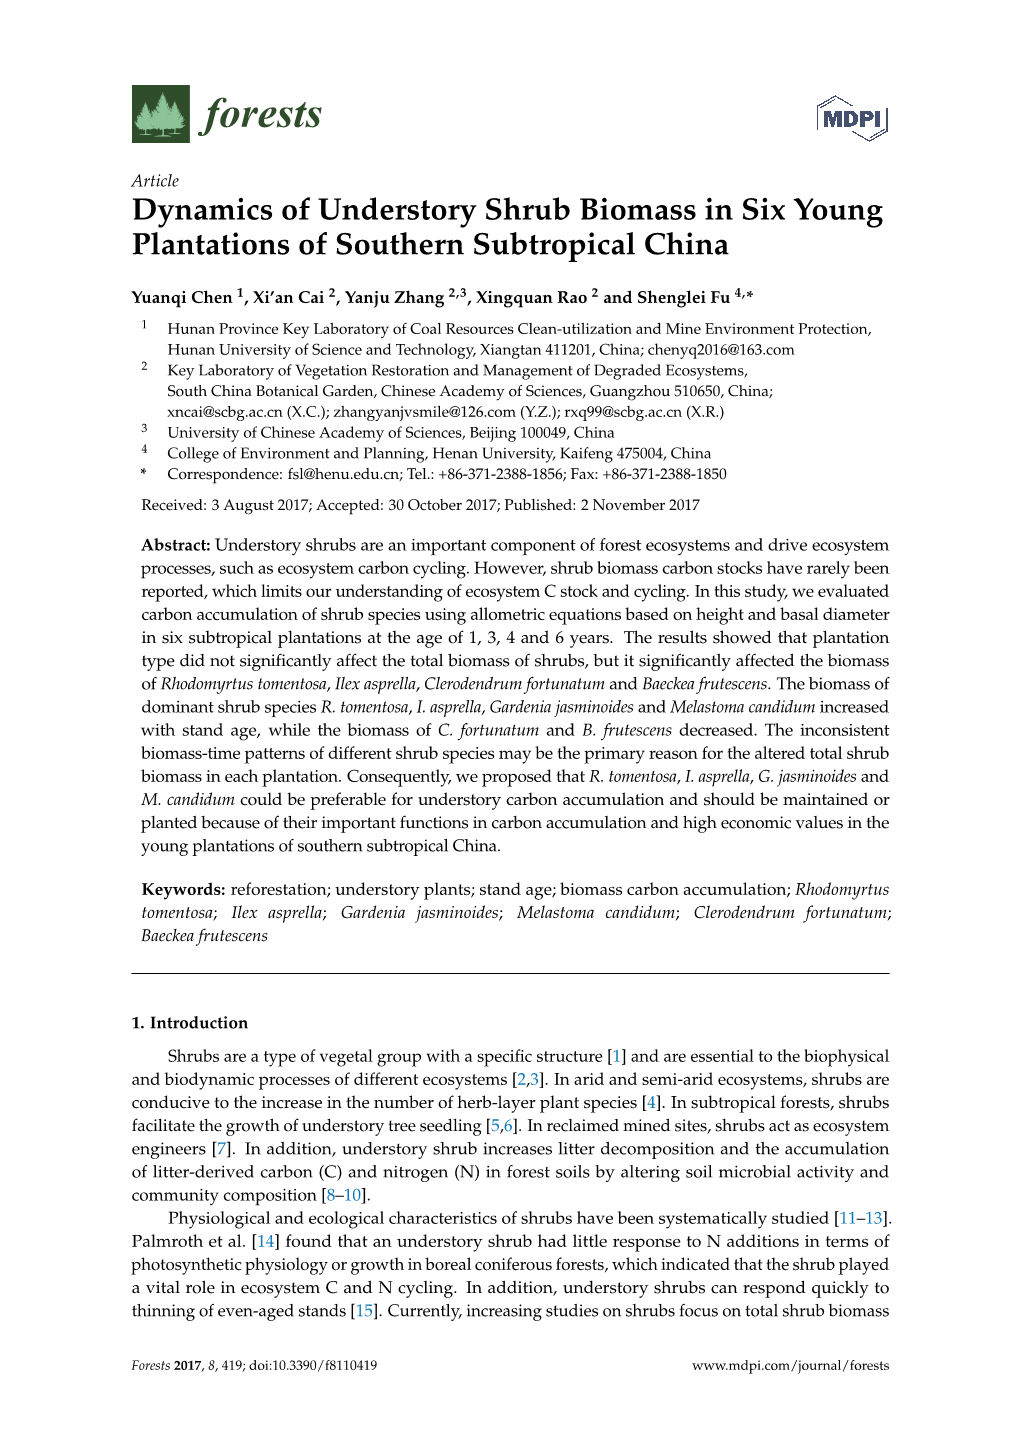 Dynamics of Understory Shrub Biomass in Six Young Plantations of Southern Subtropical China